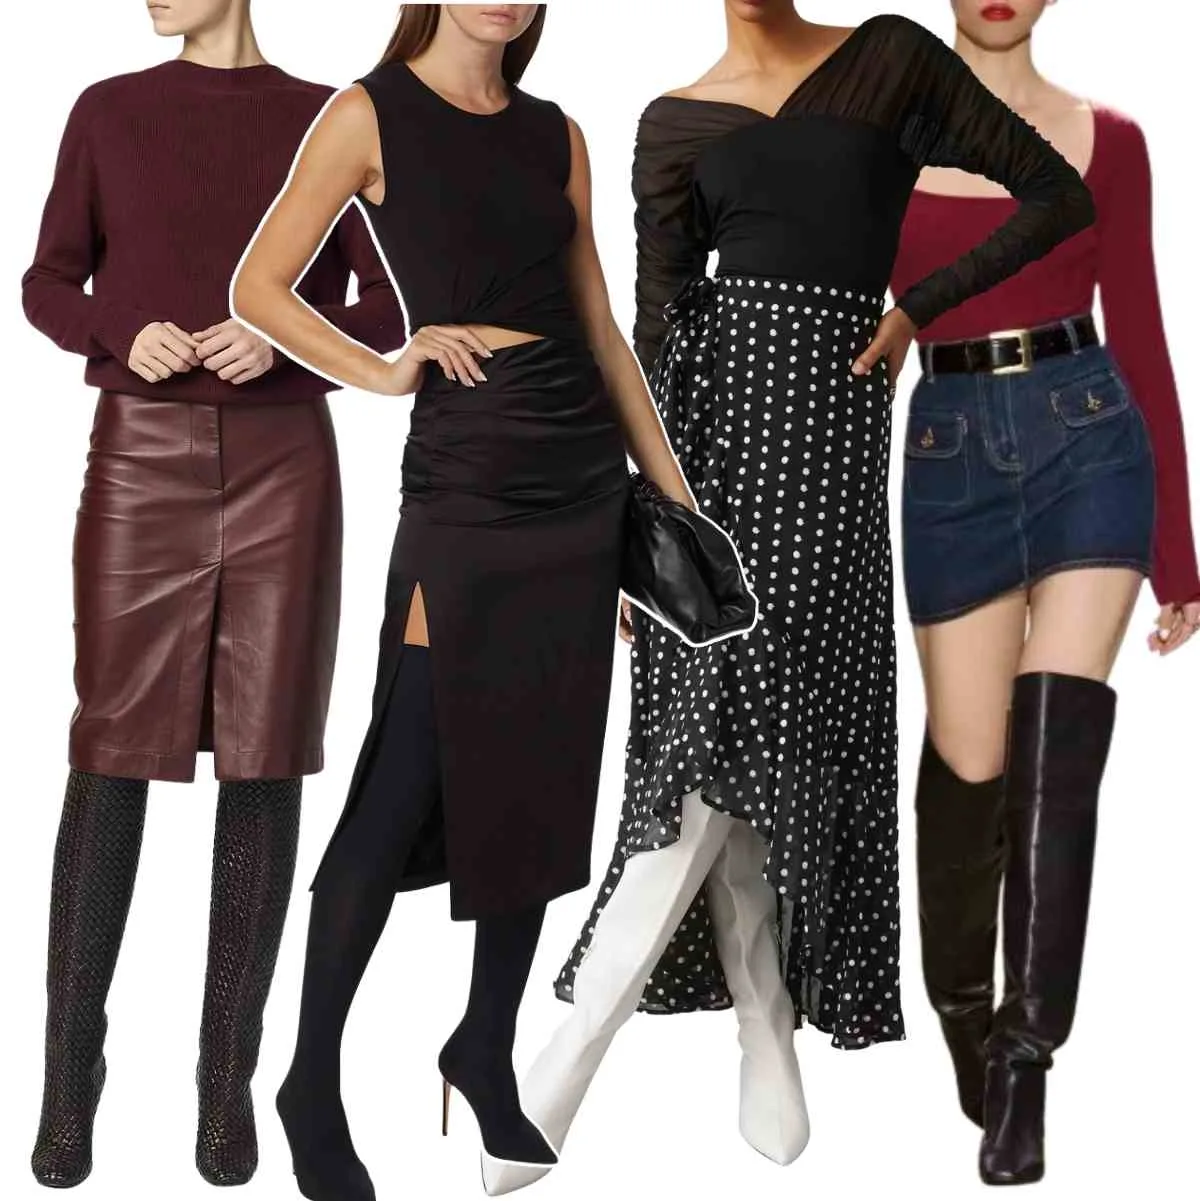 Collage of 4 women wearing different thigh high boots with skirts outfits.